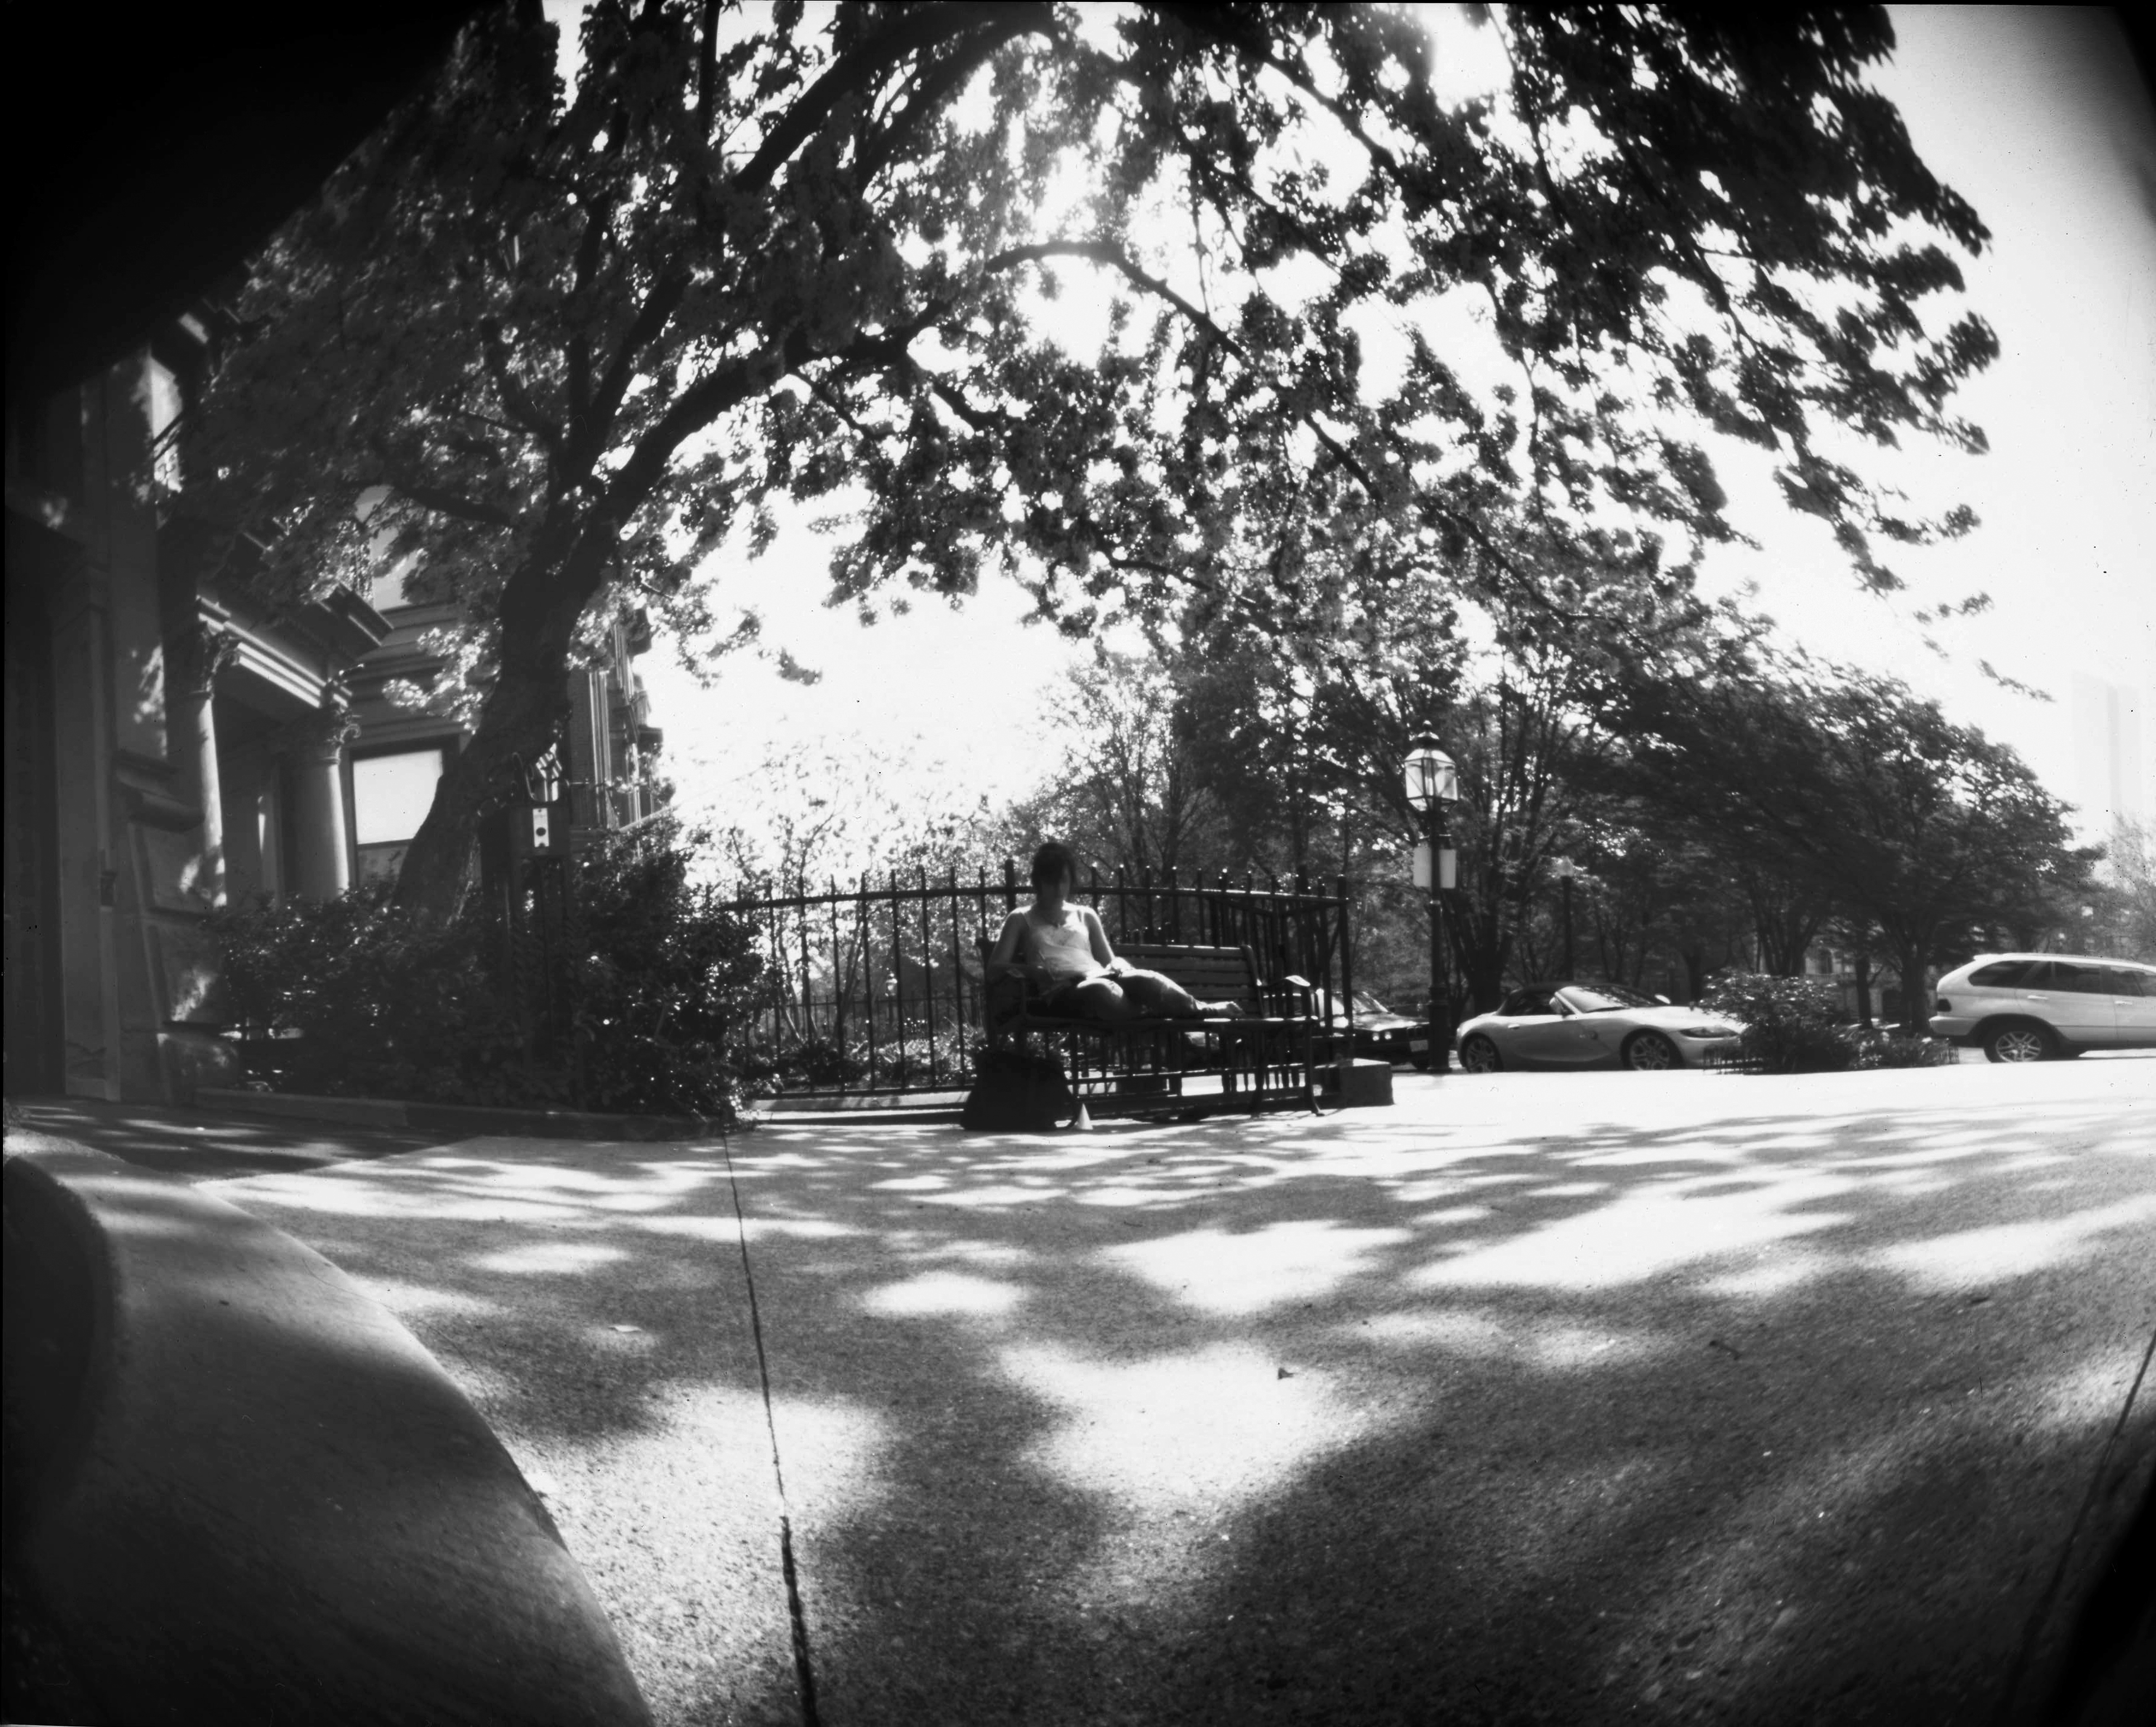 a black and white pinhole camera photograph with a large amount of curvature distortion except at the center of the image; a woman is sitting on a bench in the sun under a tree in front of a wrought iron face; there is a brownstone building’s entrance on the left and a street on the right with parked cars; there is a flowering cherry tree overhead casting dappled shadows on the concrete paved ground.